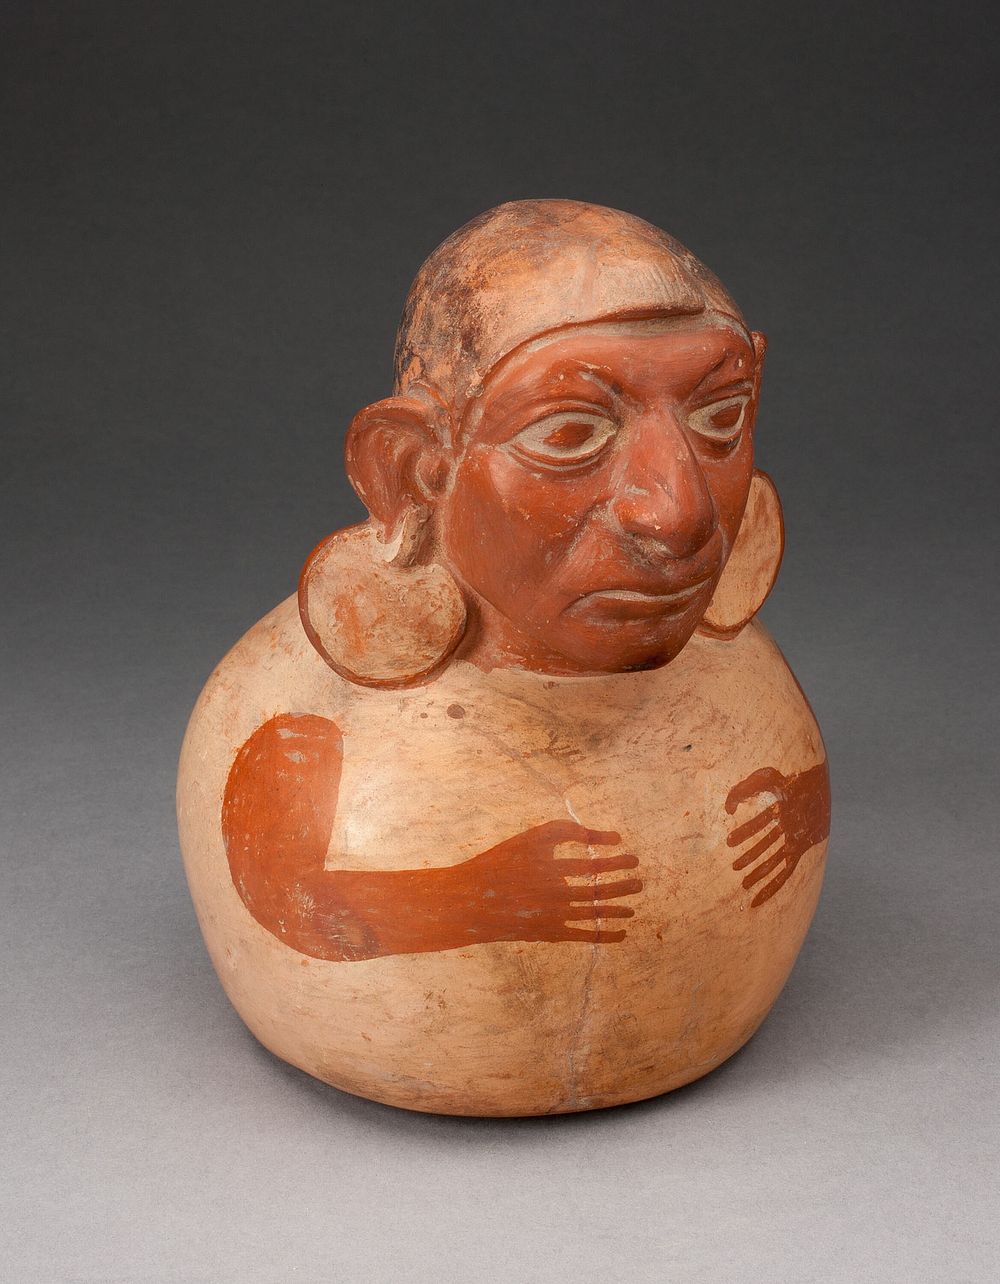 Handle Spout Vessel in the Form of a Figure with Modeled Head, Spout Missing by Moche